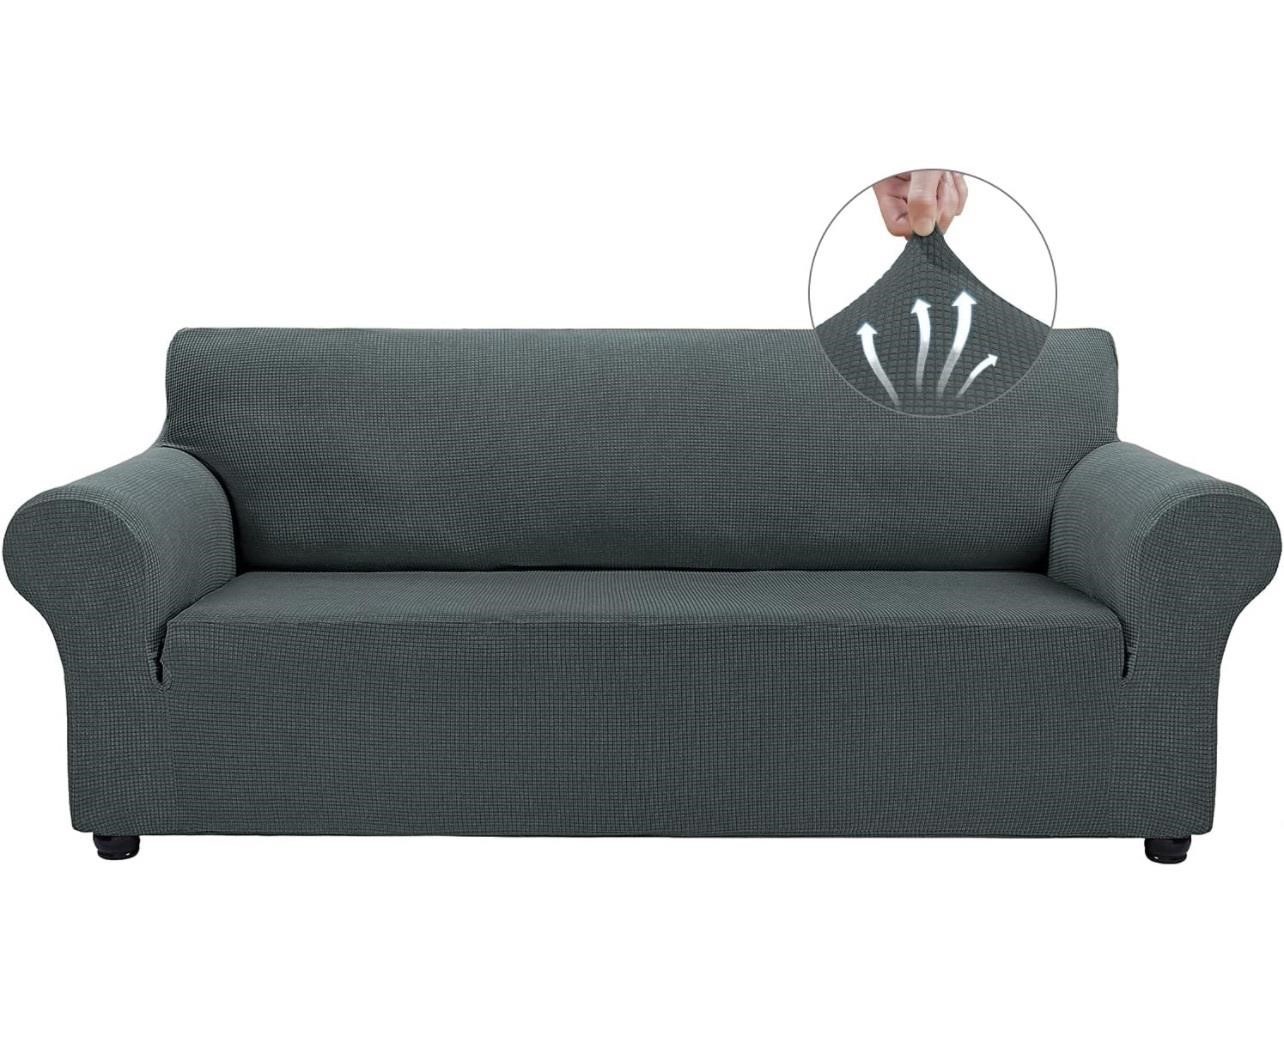 Covers for 3 Cushion Couch Stretch Sofa